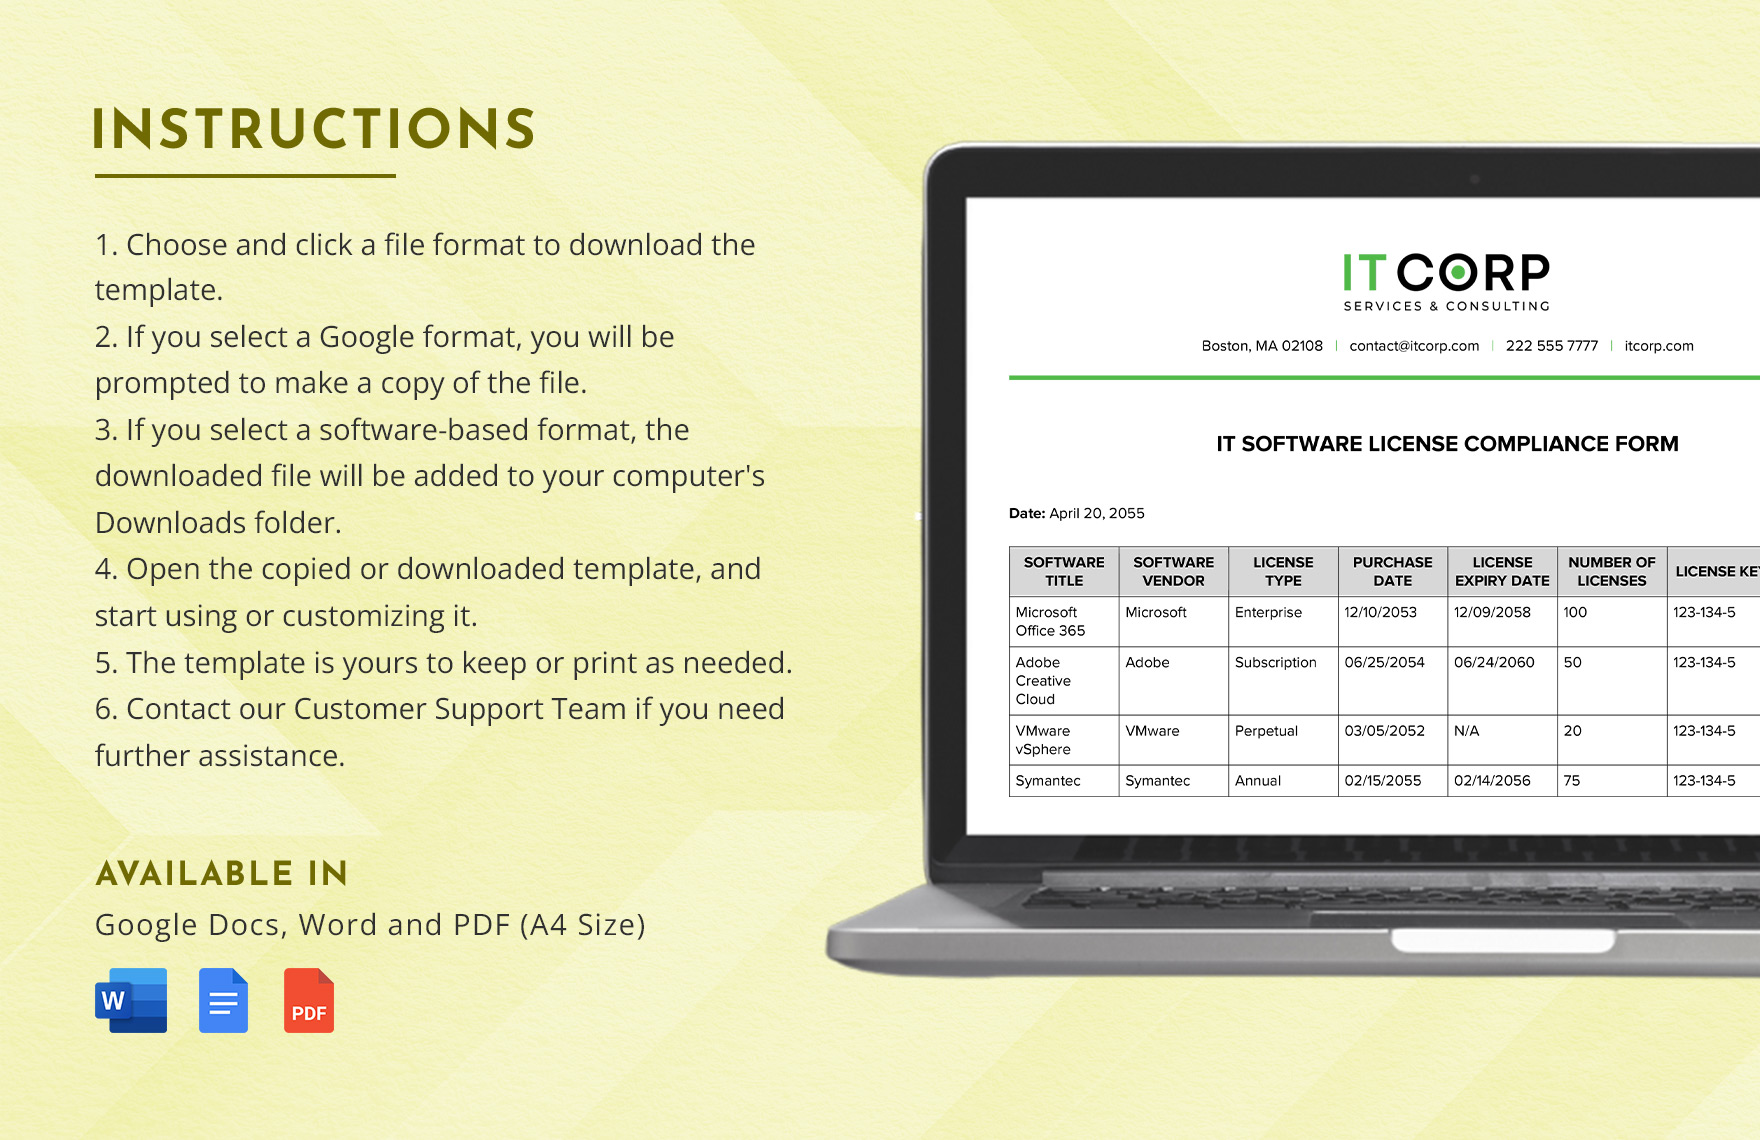 IT Software License Compliance Form Template